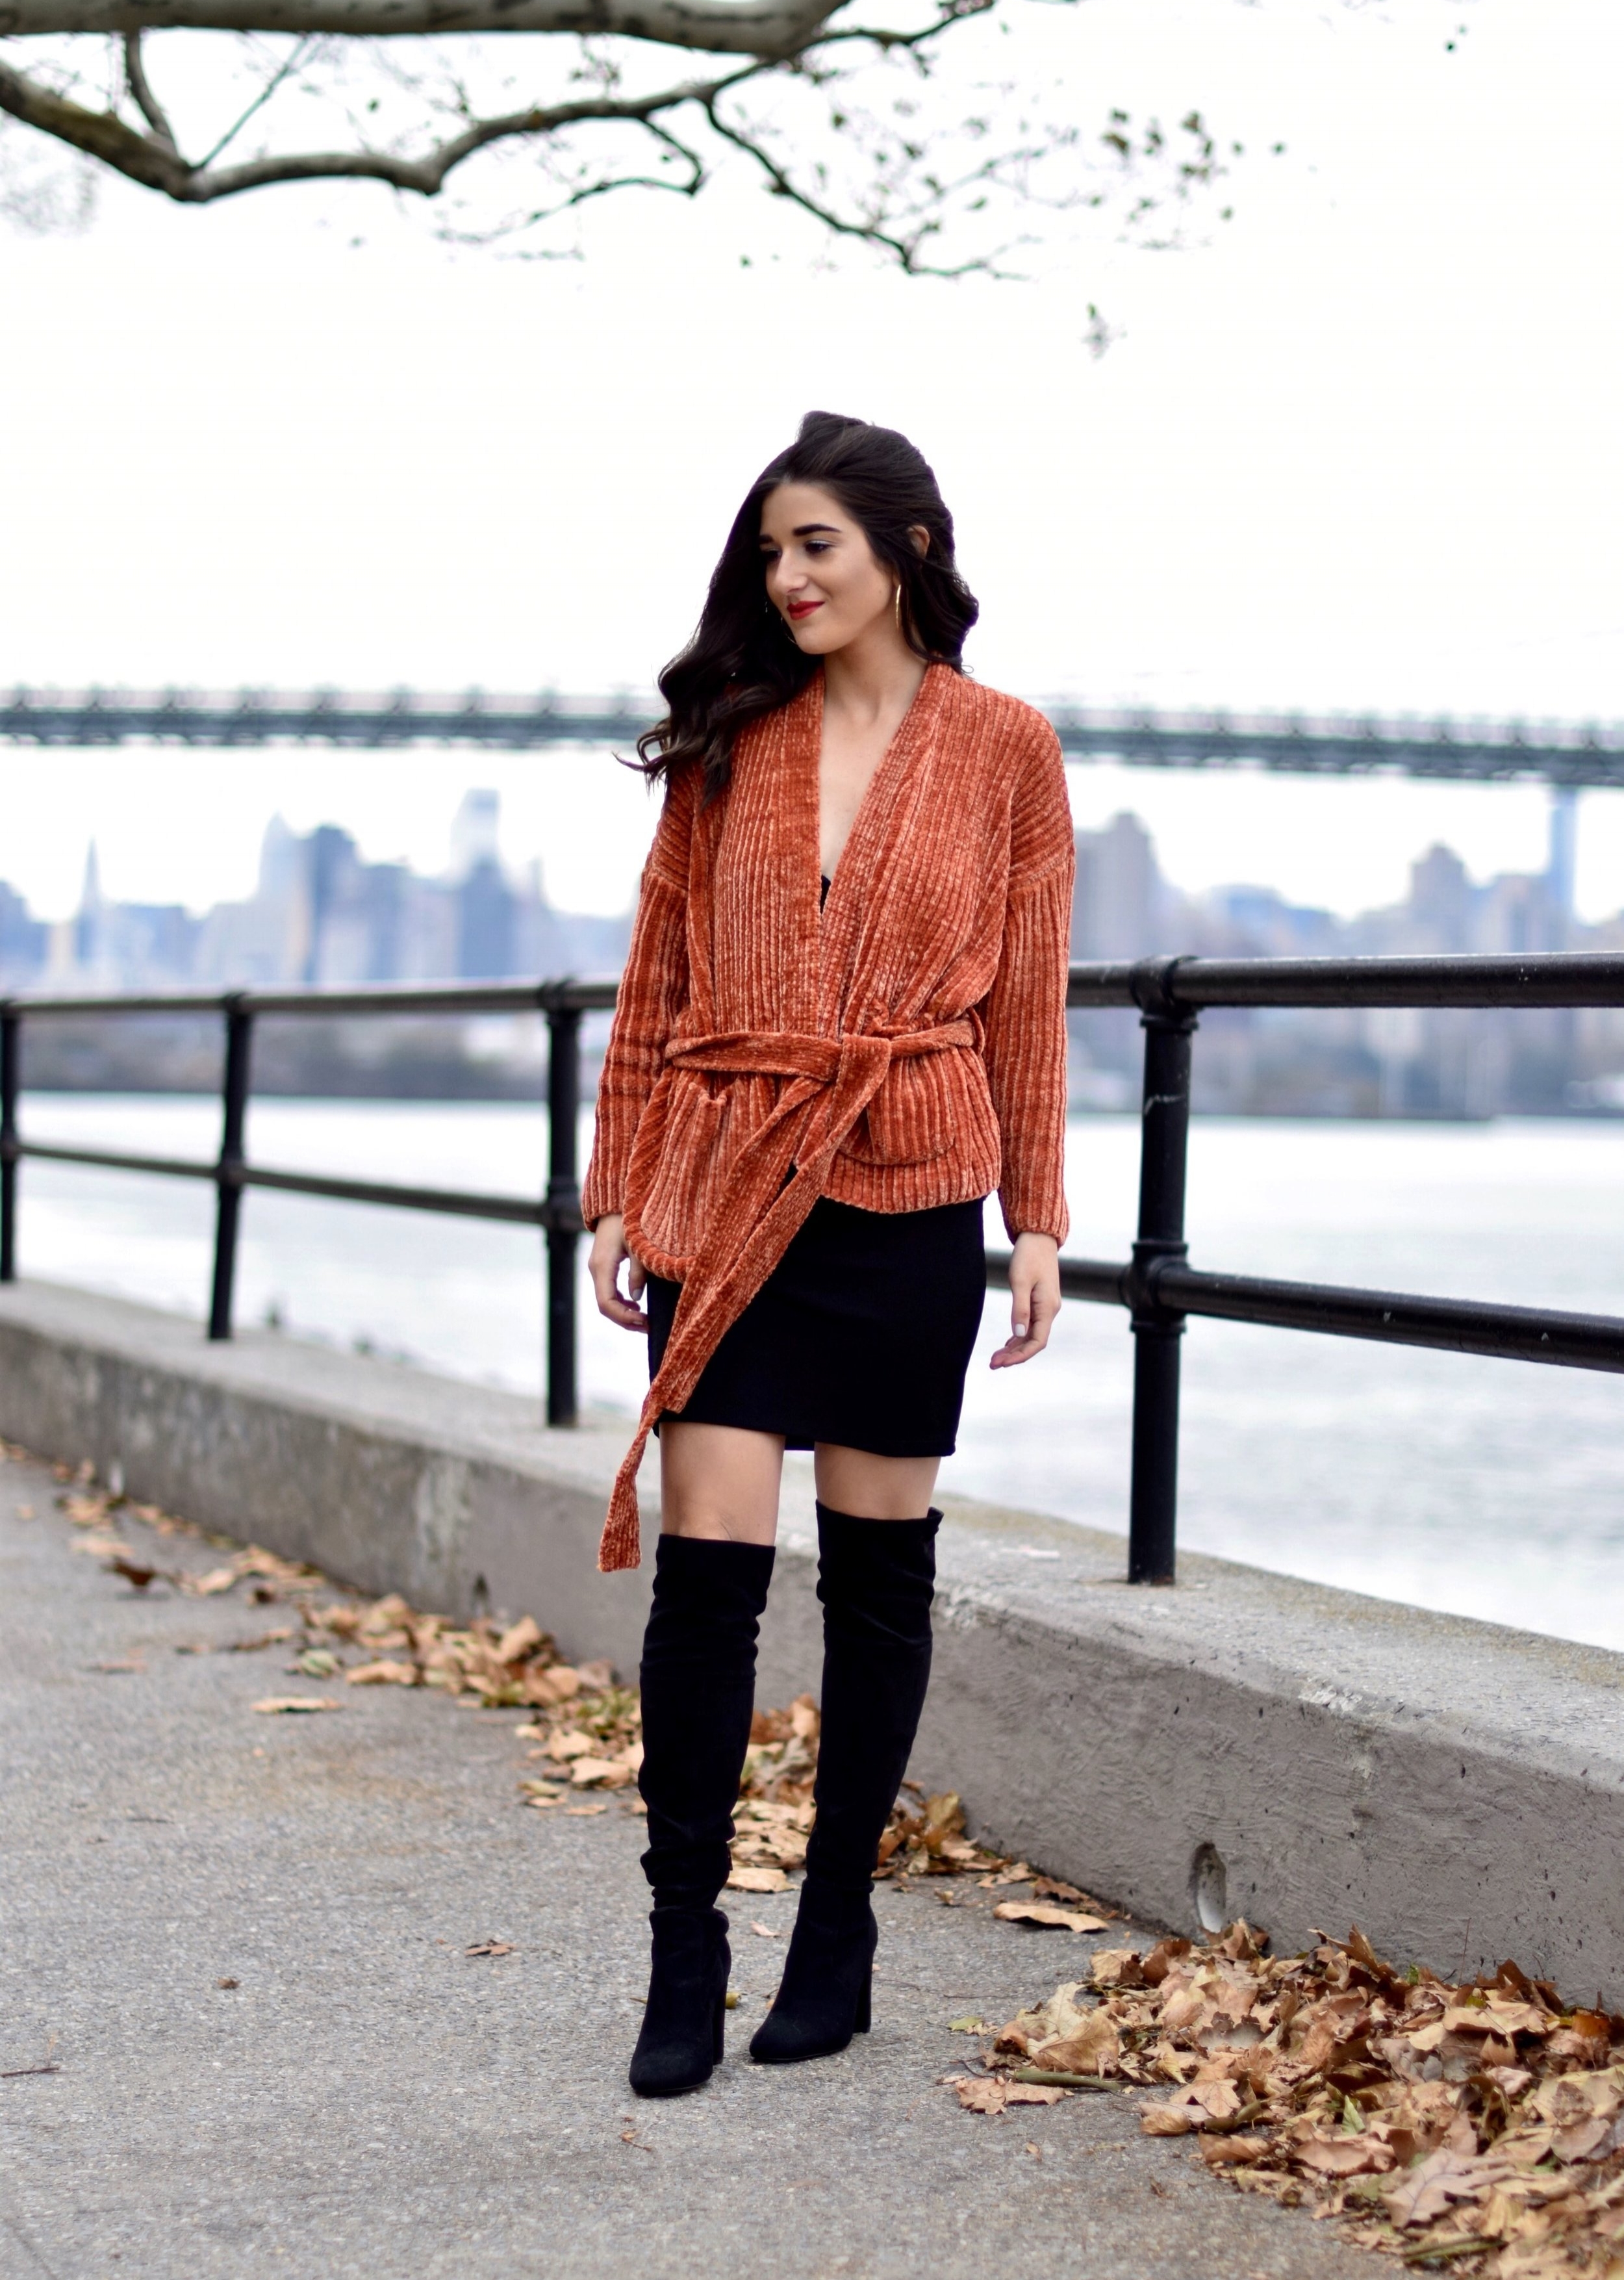 Orange Tie Sweater OTK Boots 10 Sweaters That Make The Perfect Holiday Gifts Esther Santer Fashion Blog NYC Street Style Blogger Outfit OOTD Trendy Urban Outfitters Girl Women  Black Over The Knee Boots Slip Dress Beautiful New York City Cozy OOTD.jpg